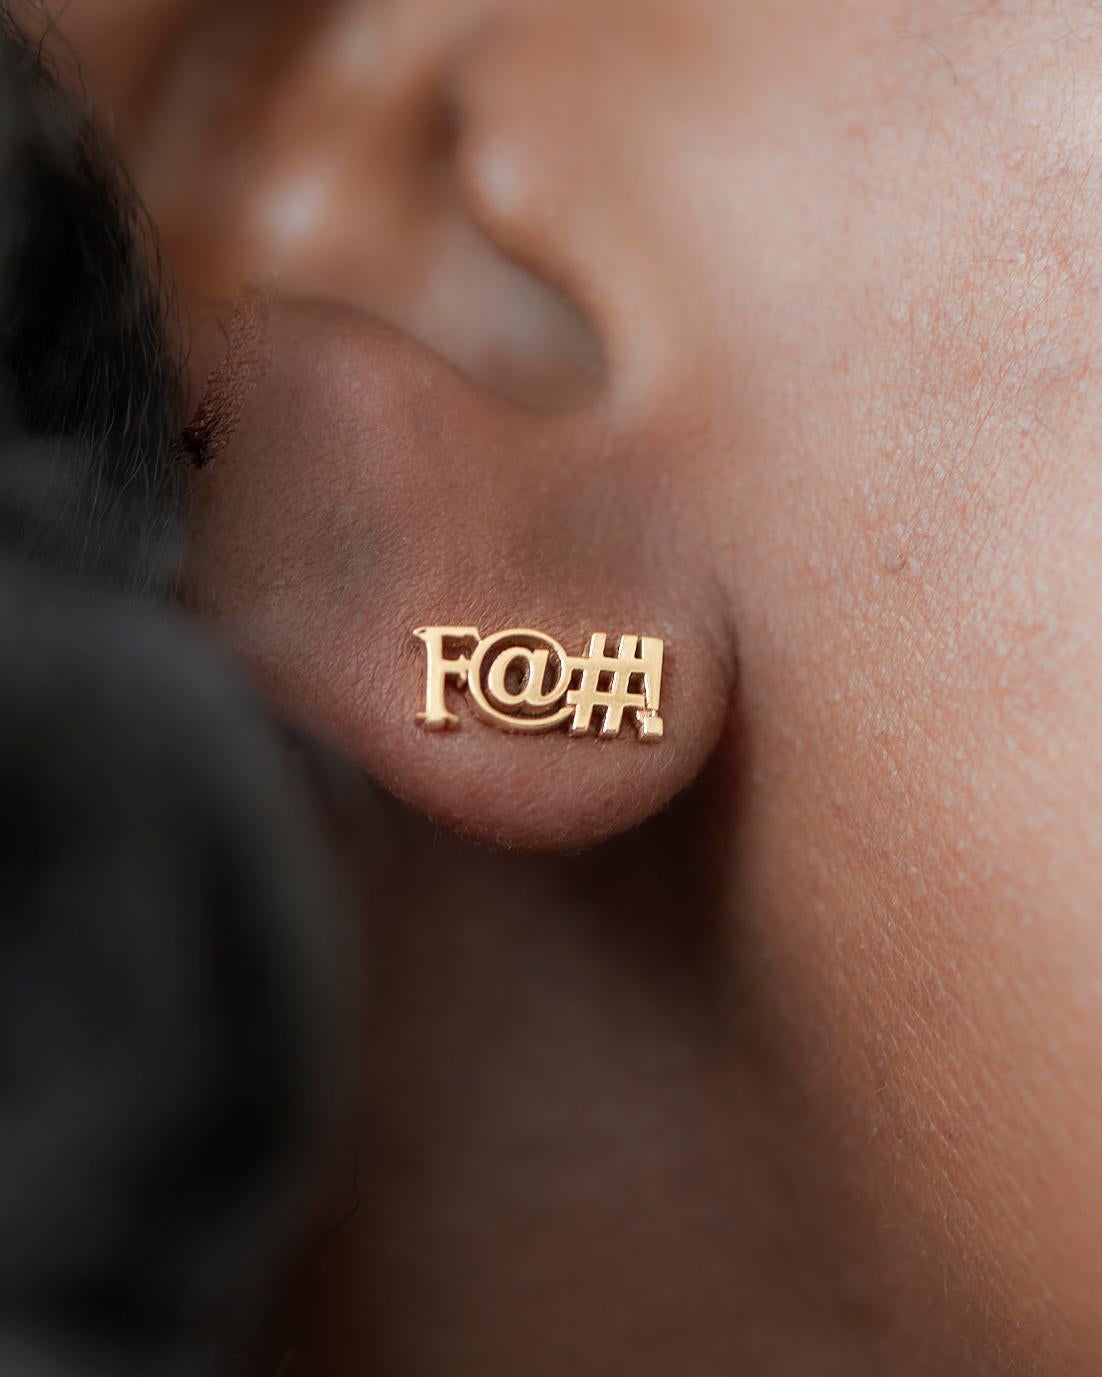 Let your earlobe do the talking with this 18K rose gold stud earring. Tastefully censored so you can wear it in polite company. Sold as a single, rather than a pair, so you don't have to repeat yourself ... but if you want a pair, go ahead and buy